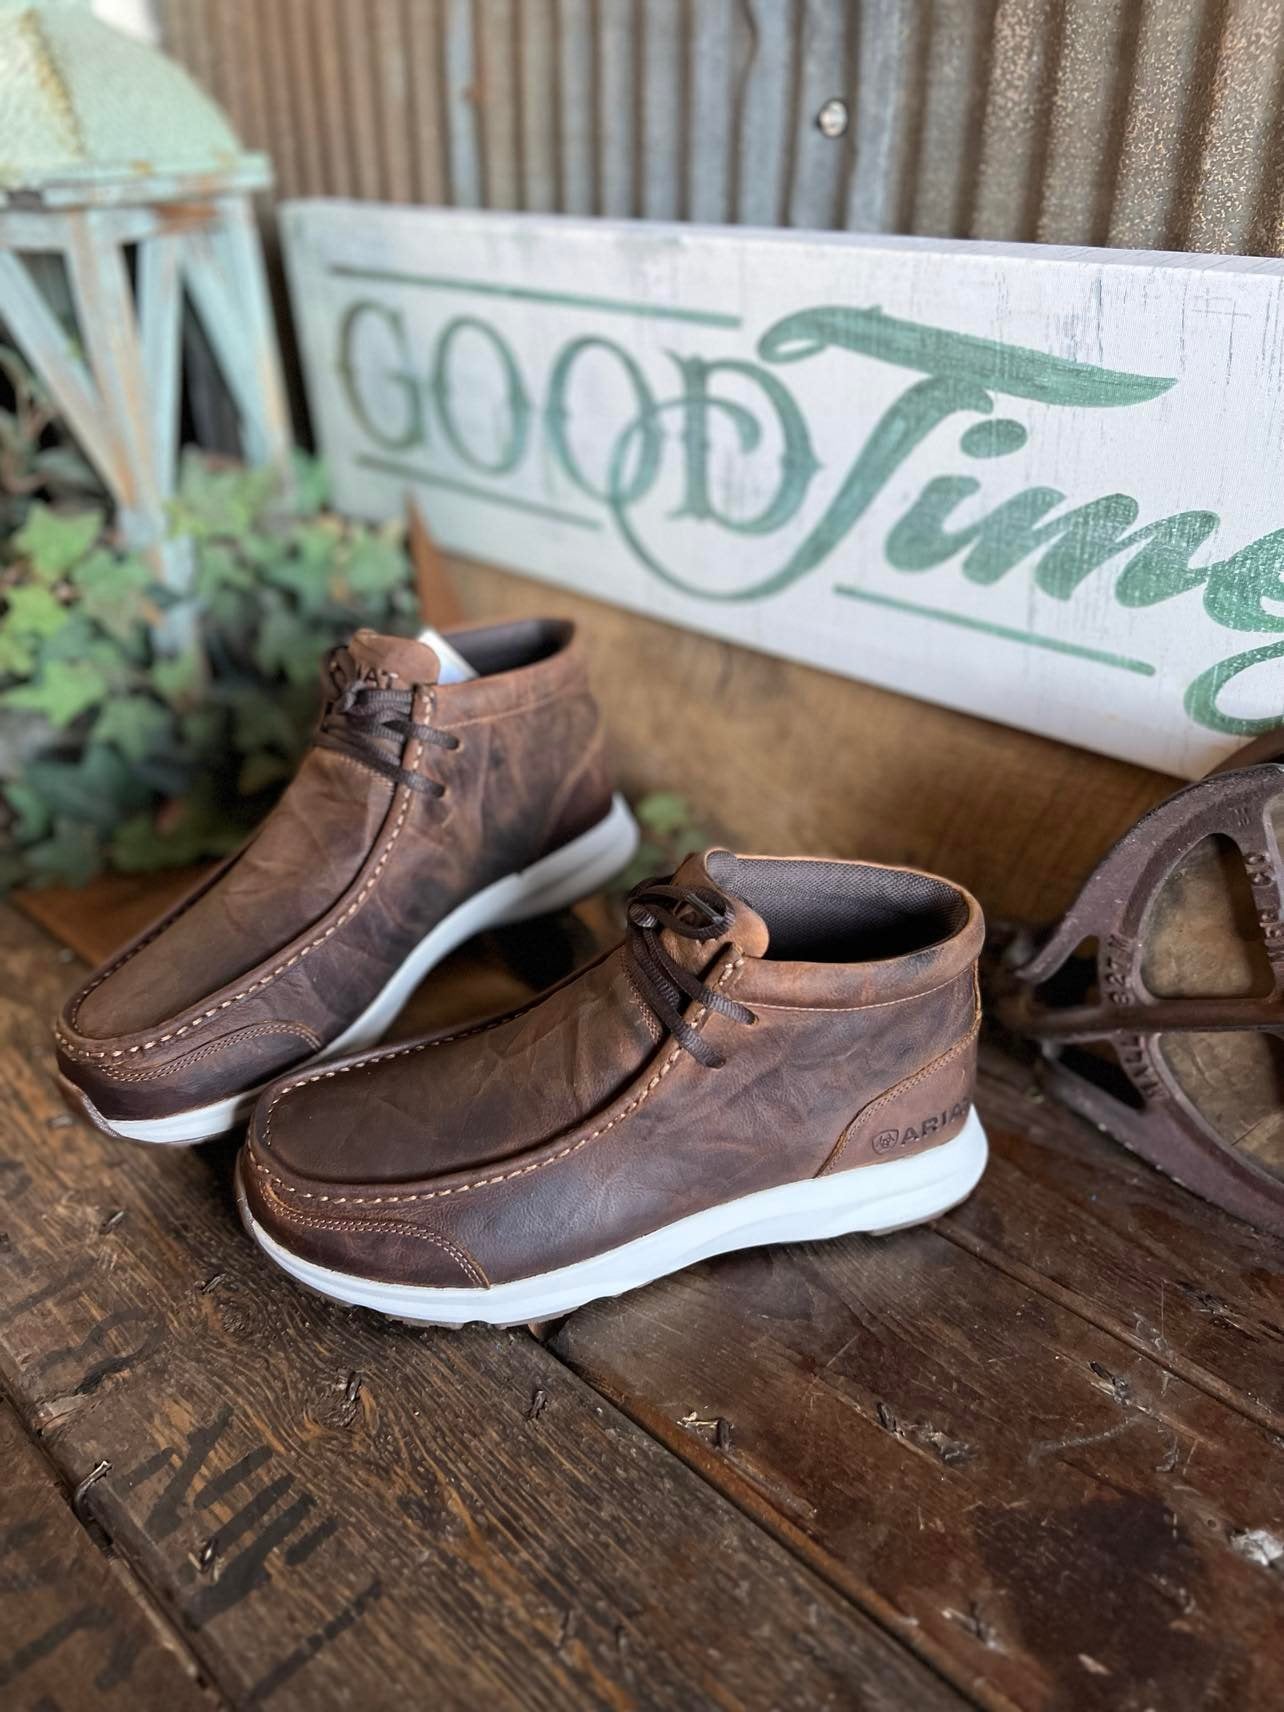 Men's Ariat Spitfire Shoes in Sorrel Crunch-Men's Casual Shoes-Ariat-Lucky J Boots & More, Women's, Men's, & Kids Western Store Located in Carthage, MO